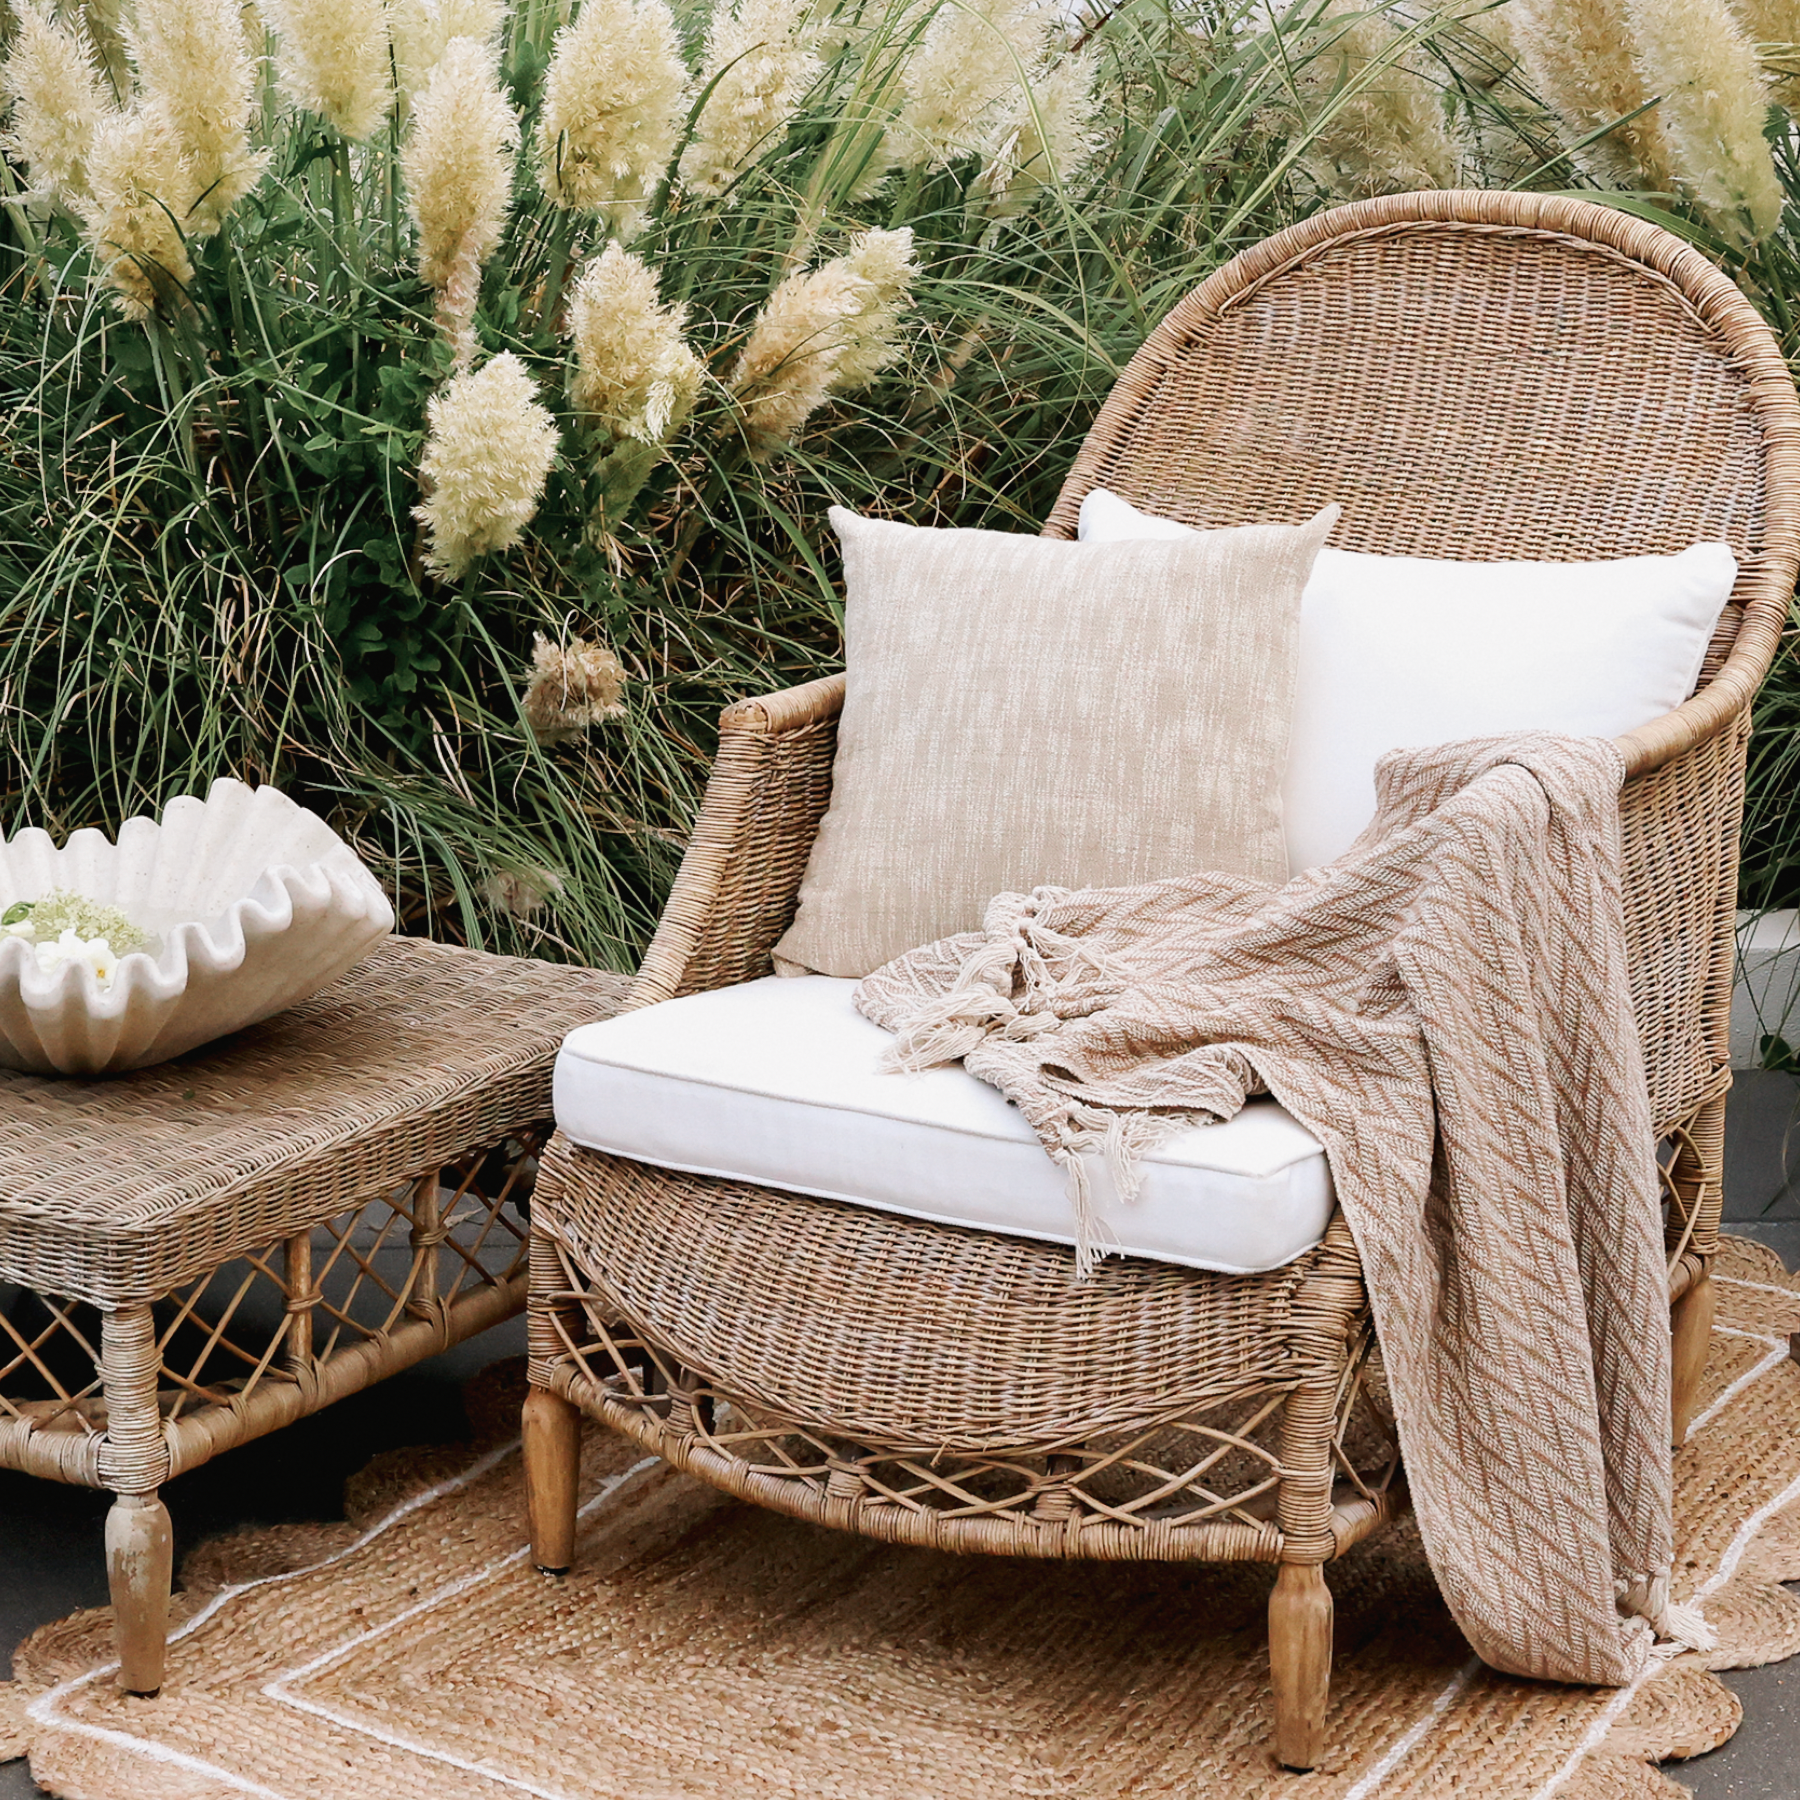 an outdoor living space with rattan armchair, jute rug and pampas grass.